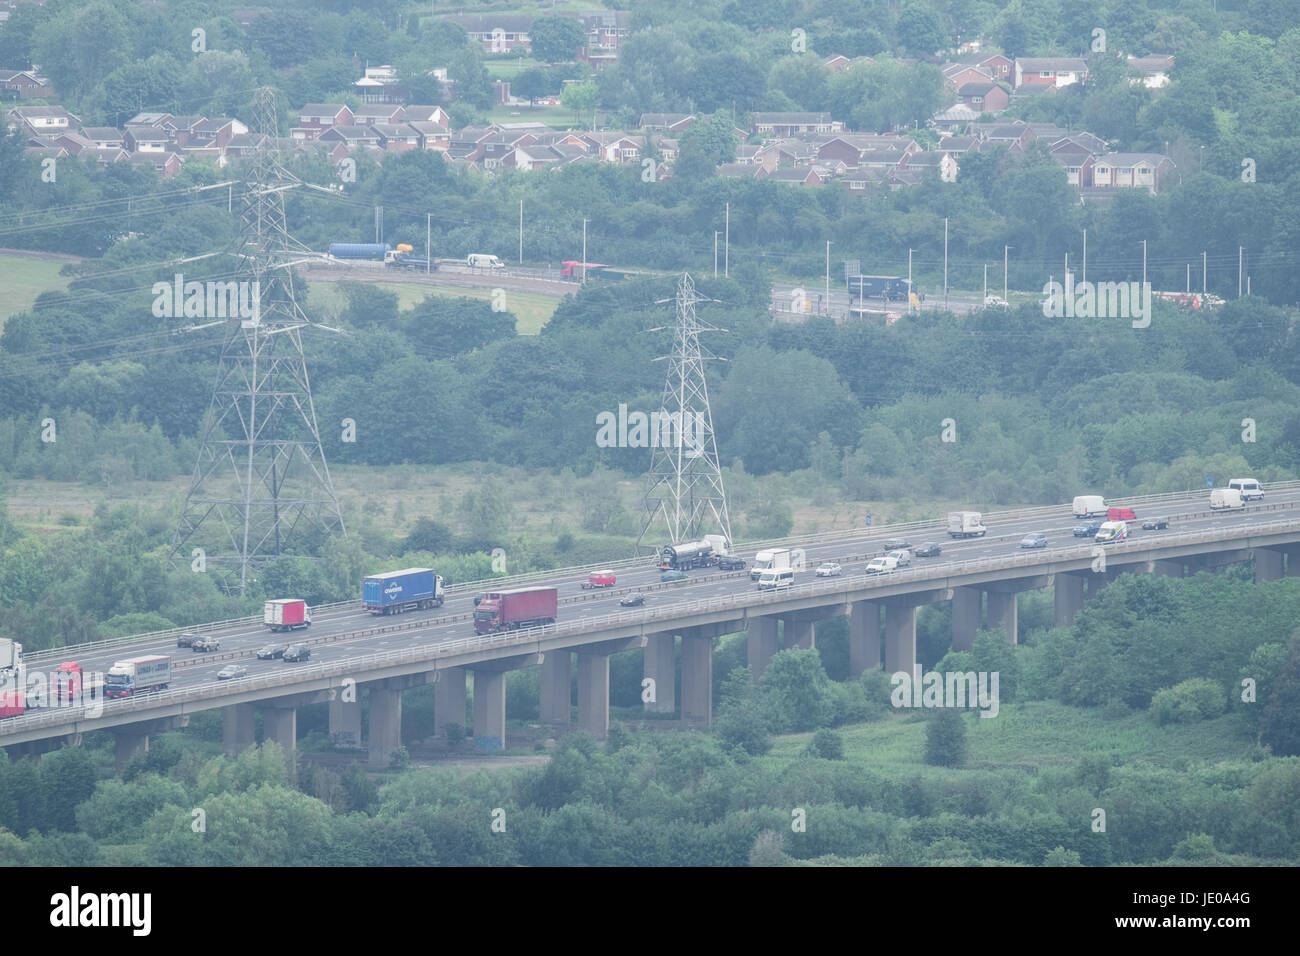 Frodsham Hill, Cheshire, UK. 22nd Jun, 2017. Traffic on the M56 motorway crossing Weaver Viaduct. Cloudy weather across the north west of England as seen from Frodsham Hill in Cheshire on Thursday, June 22, 2017, following record high temperatures over previous days. Credit: Christopher Middleton/Alamy Live News Stock Photo